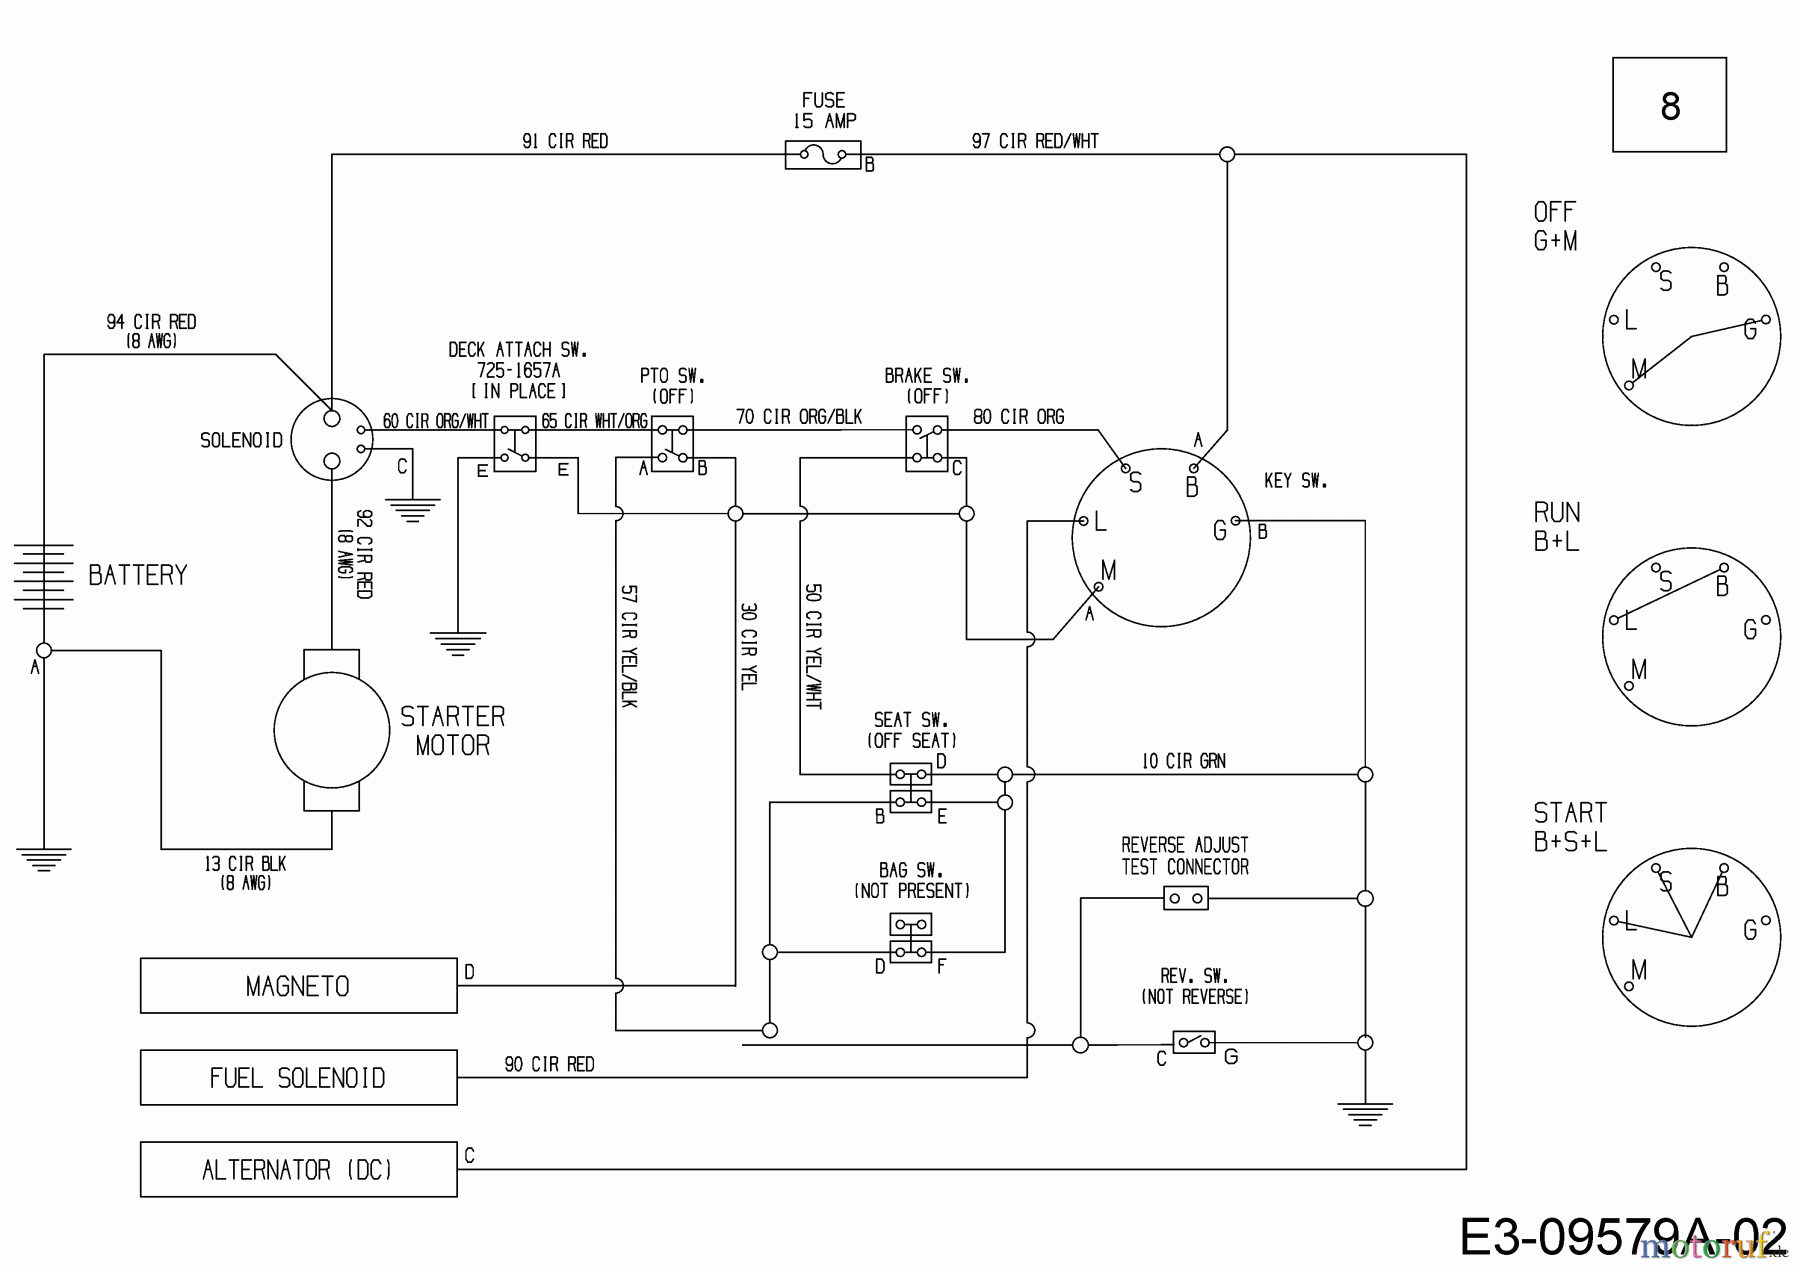  Wolf-Garten Lawn tractors Scooter Hydro 13A221SD650  (2018) Wiring diagram